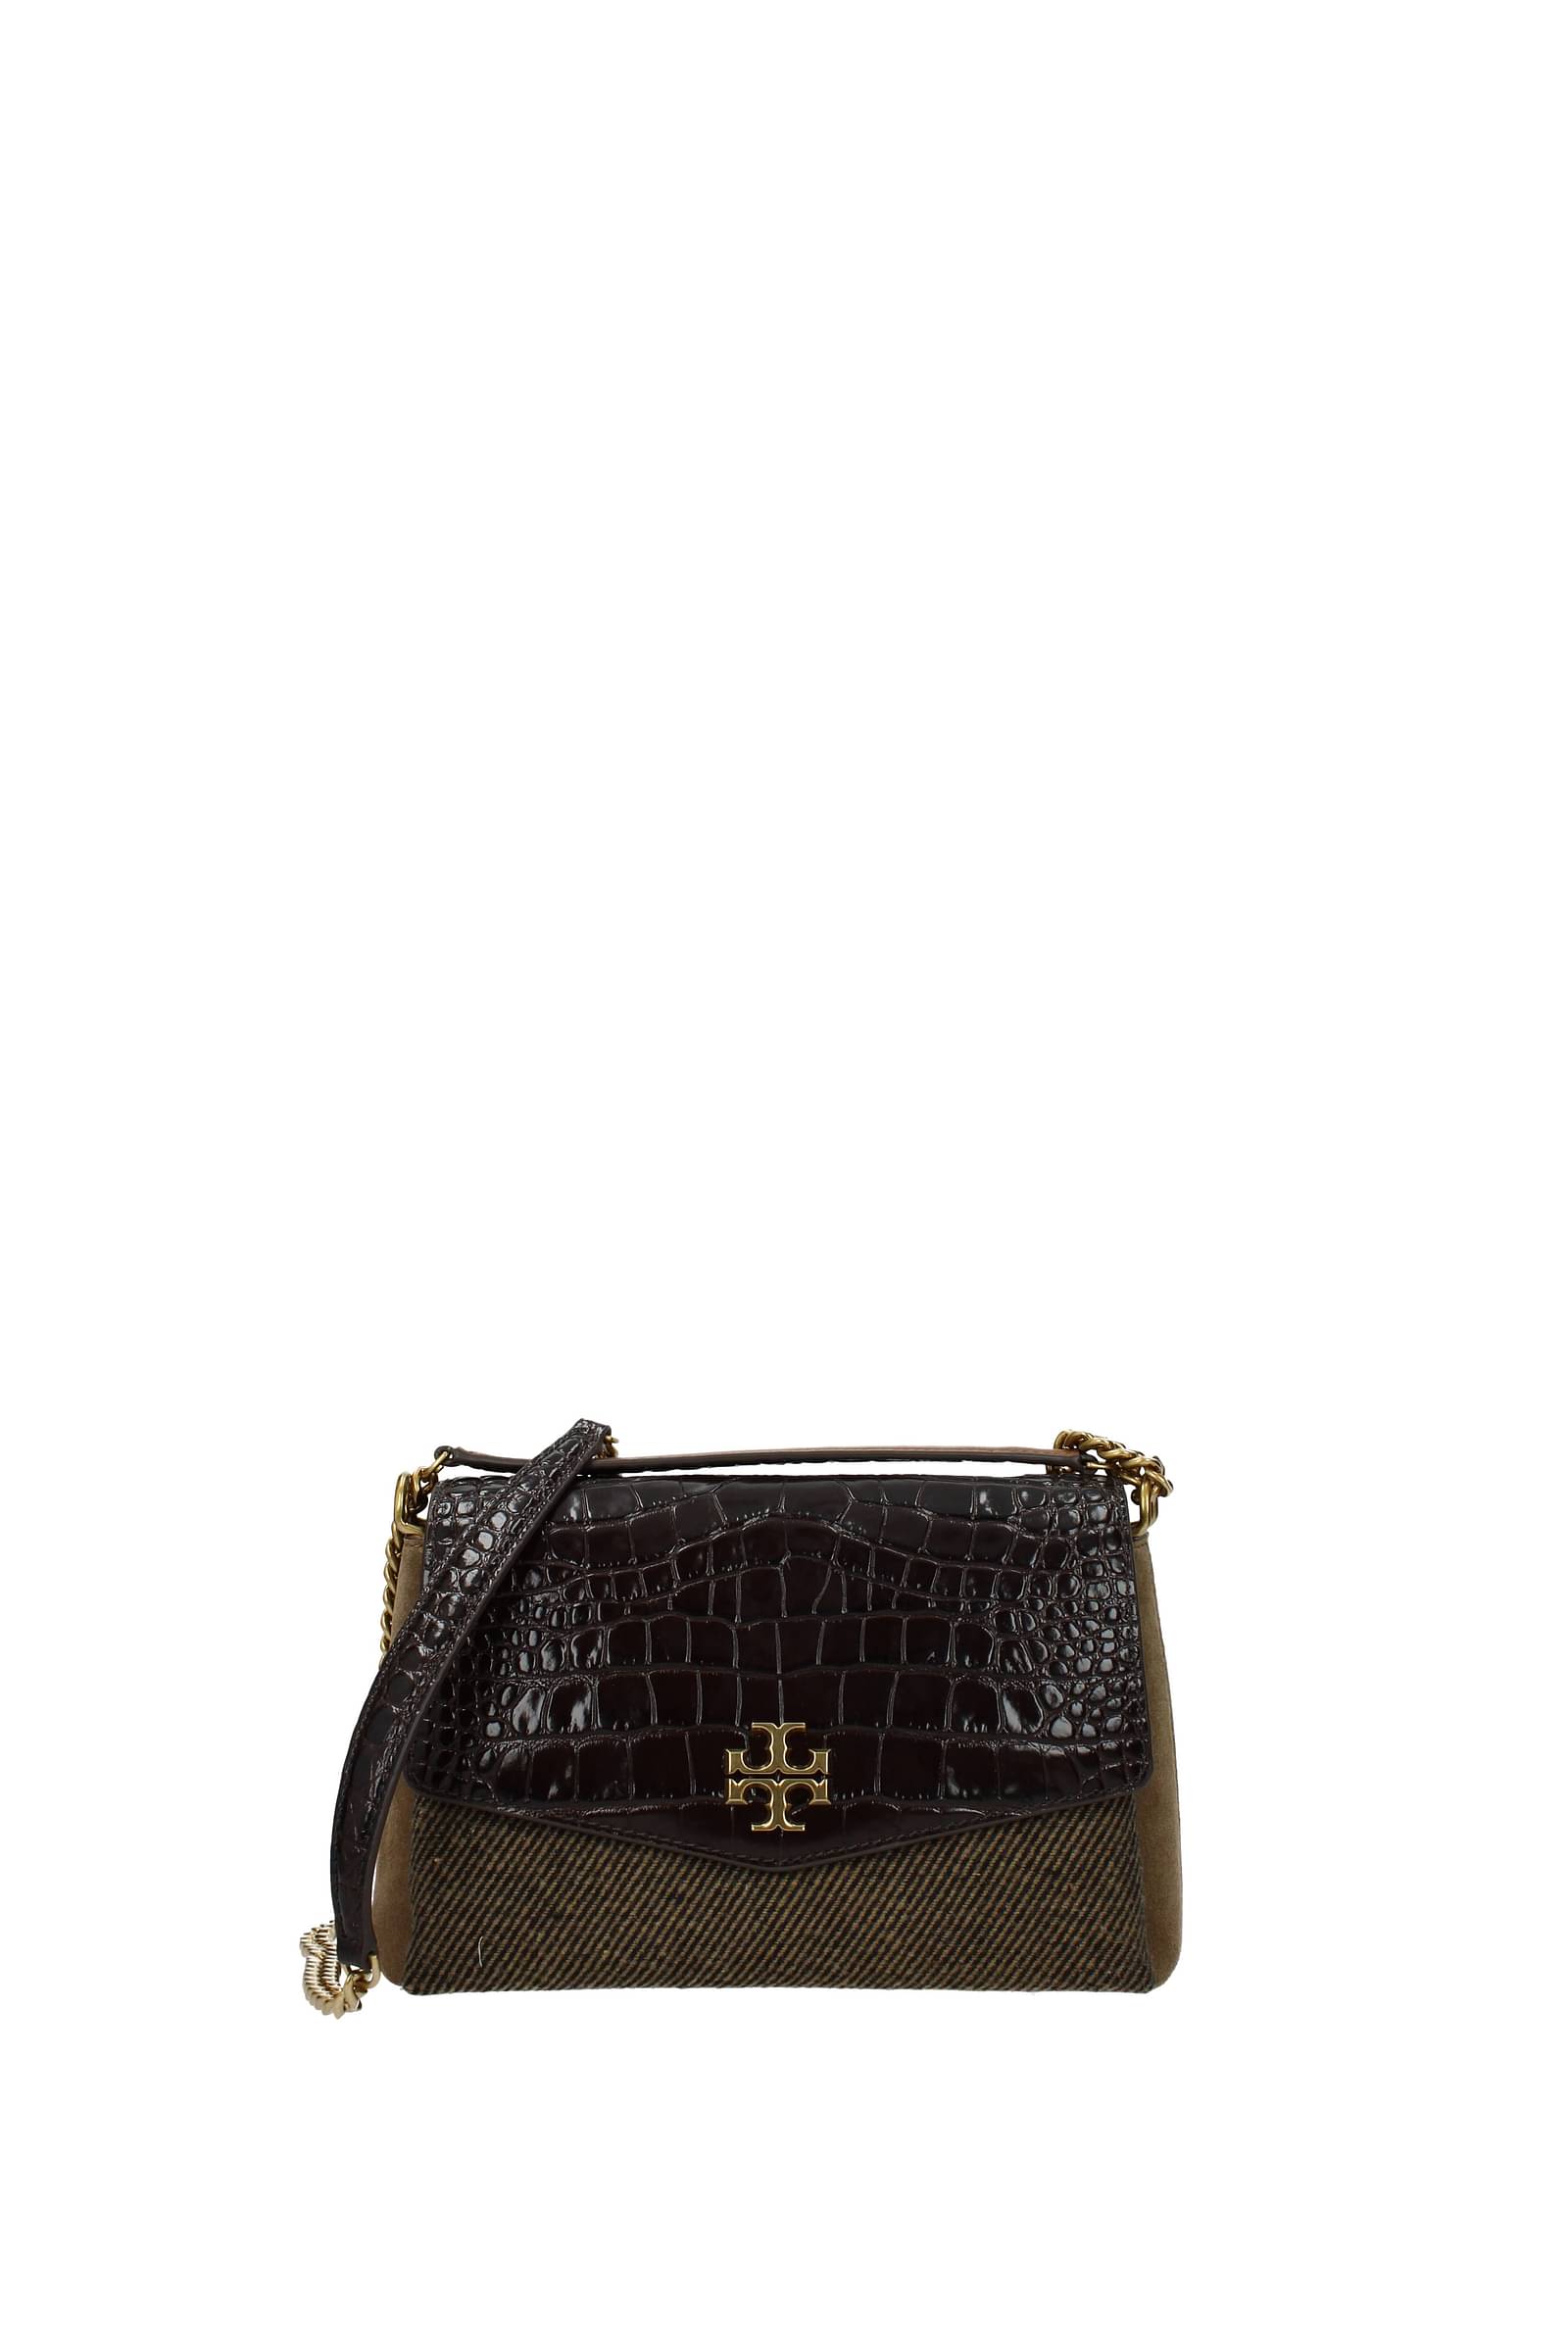 Tory Burch bags on sale at special 